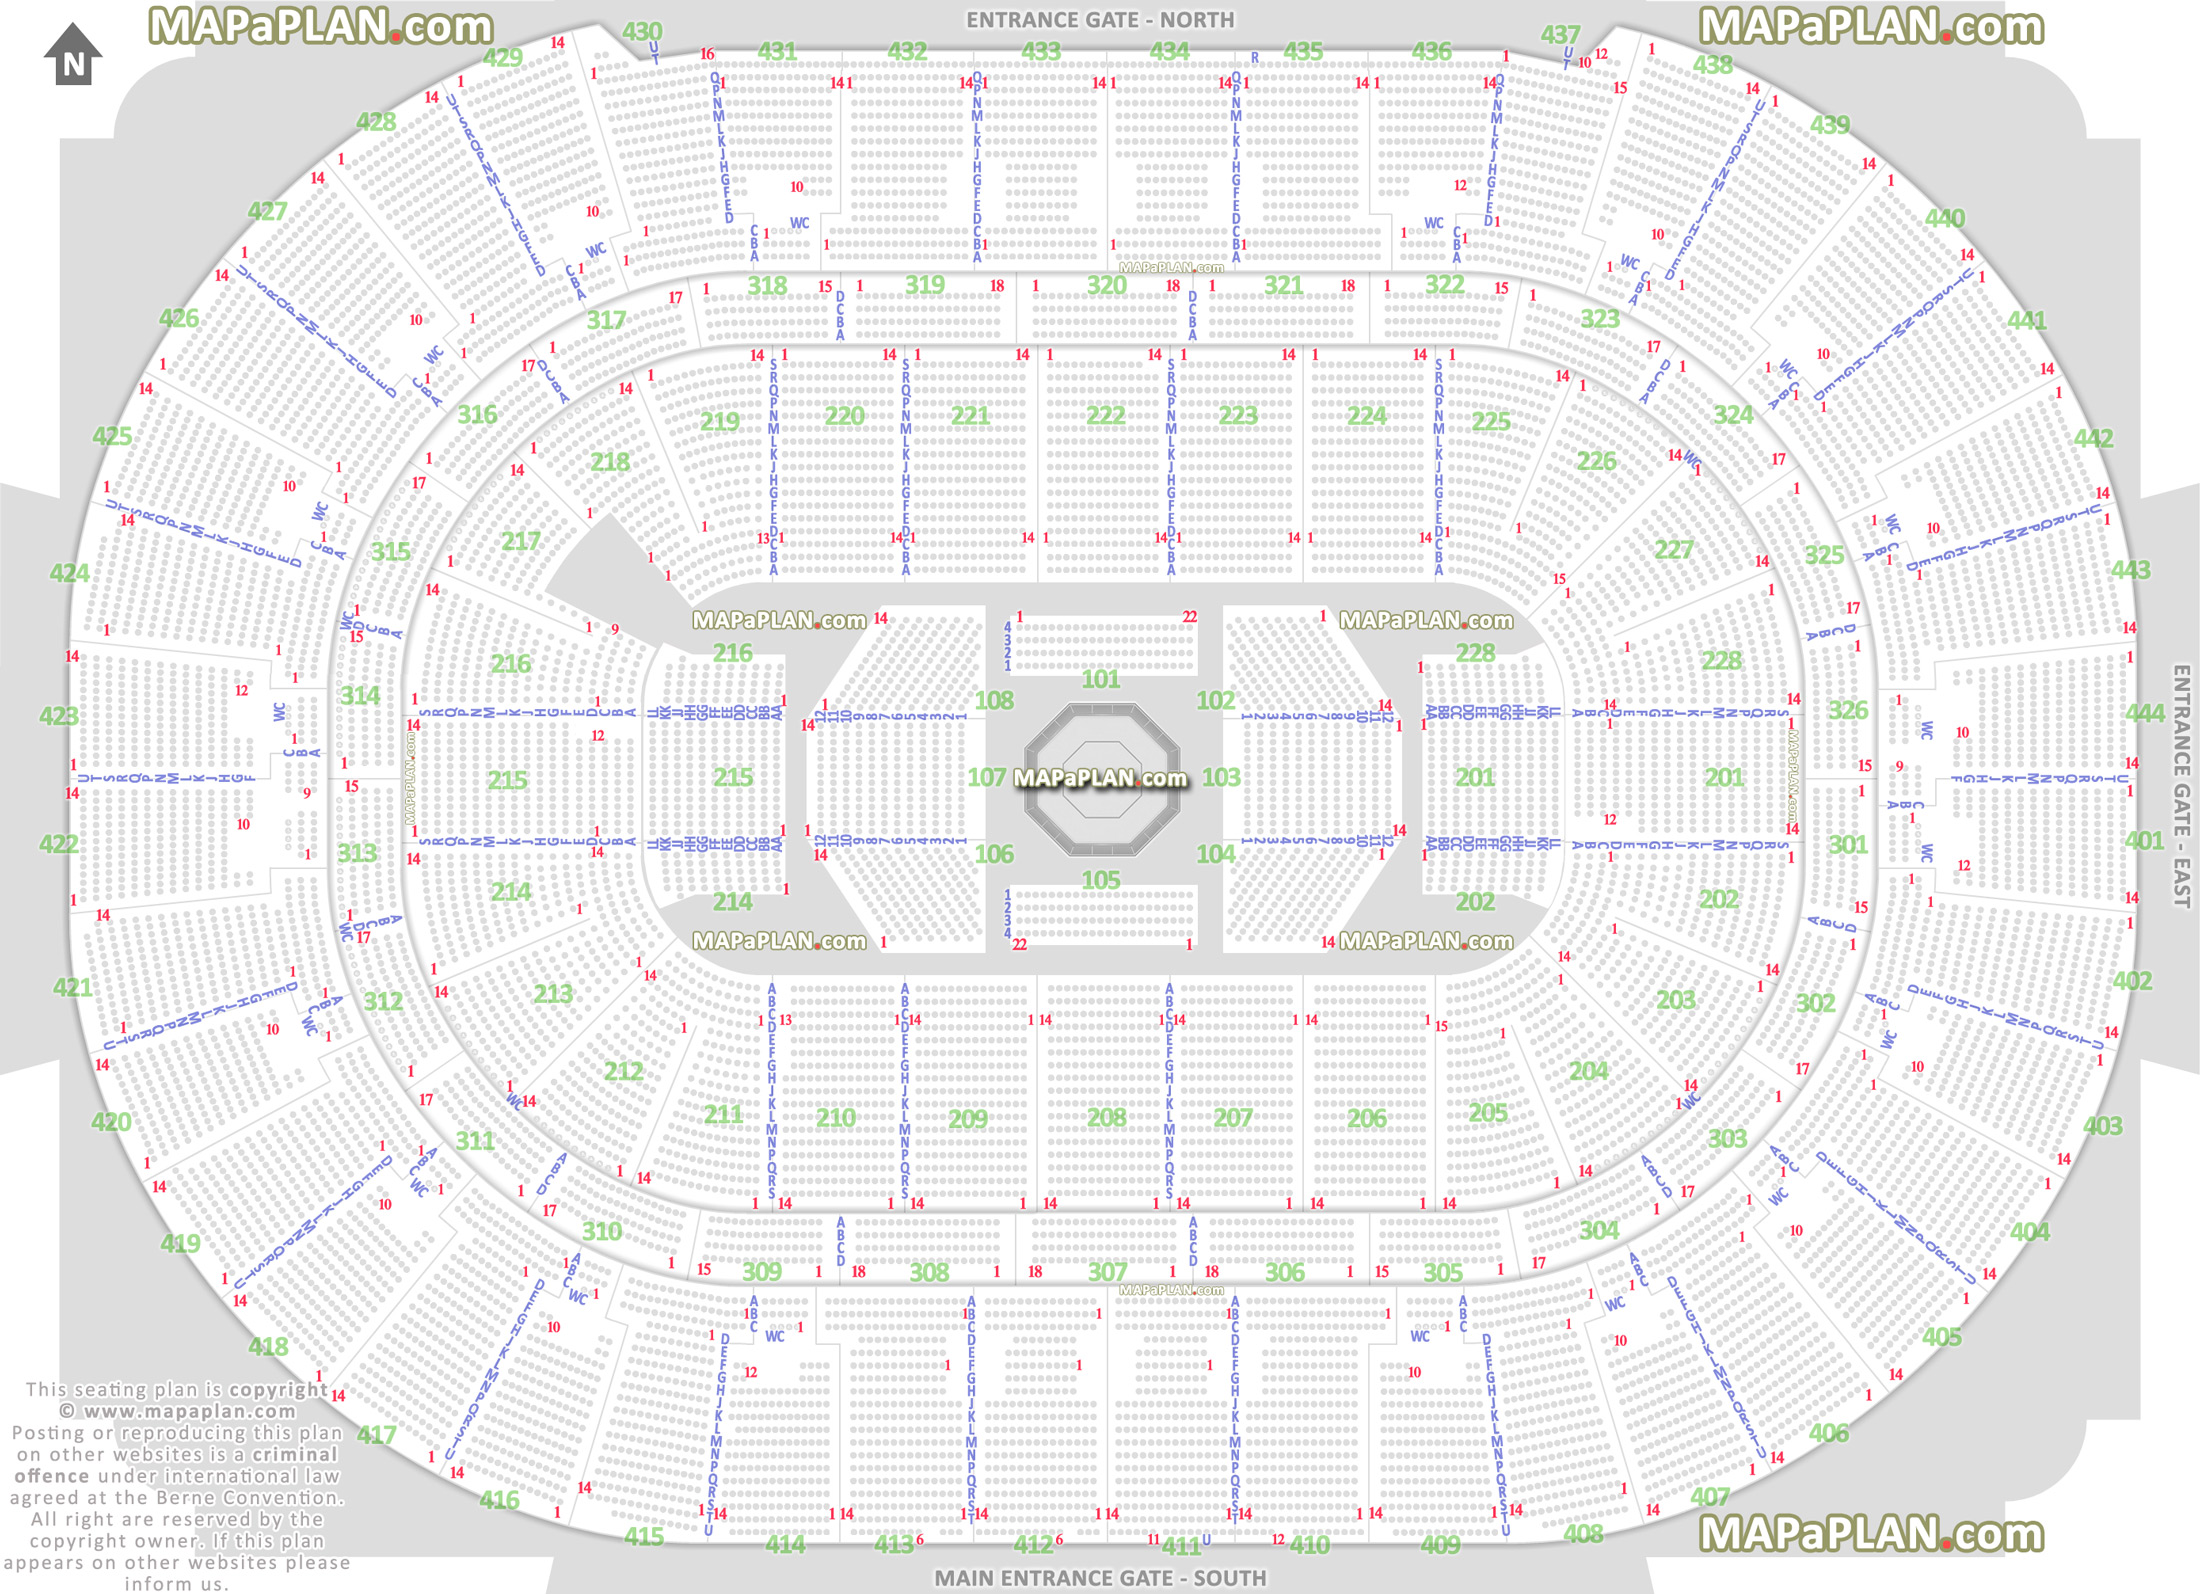 ufc mma fights fully seated setup chart viewer main entrance gates exit detailed map wheelchair disabled handicap accessible seating san manuel premium club level Anaheim Honda Center seating chart